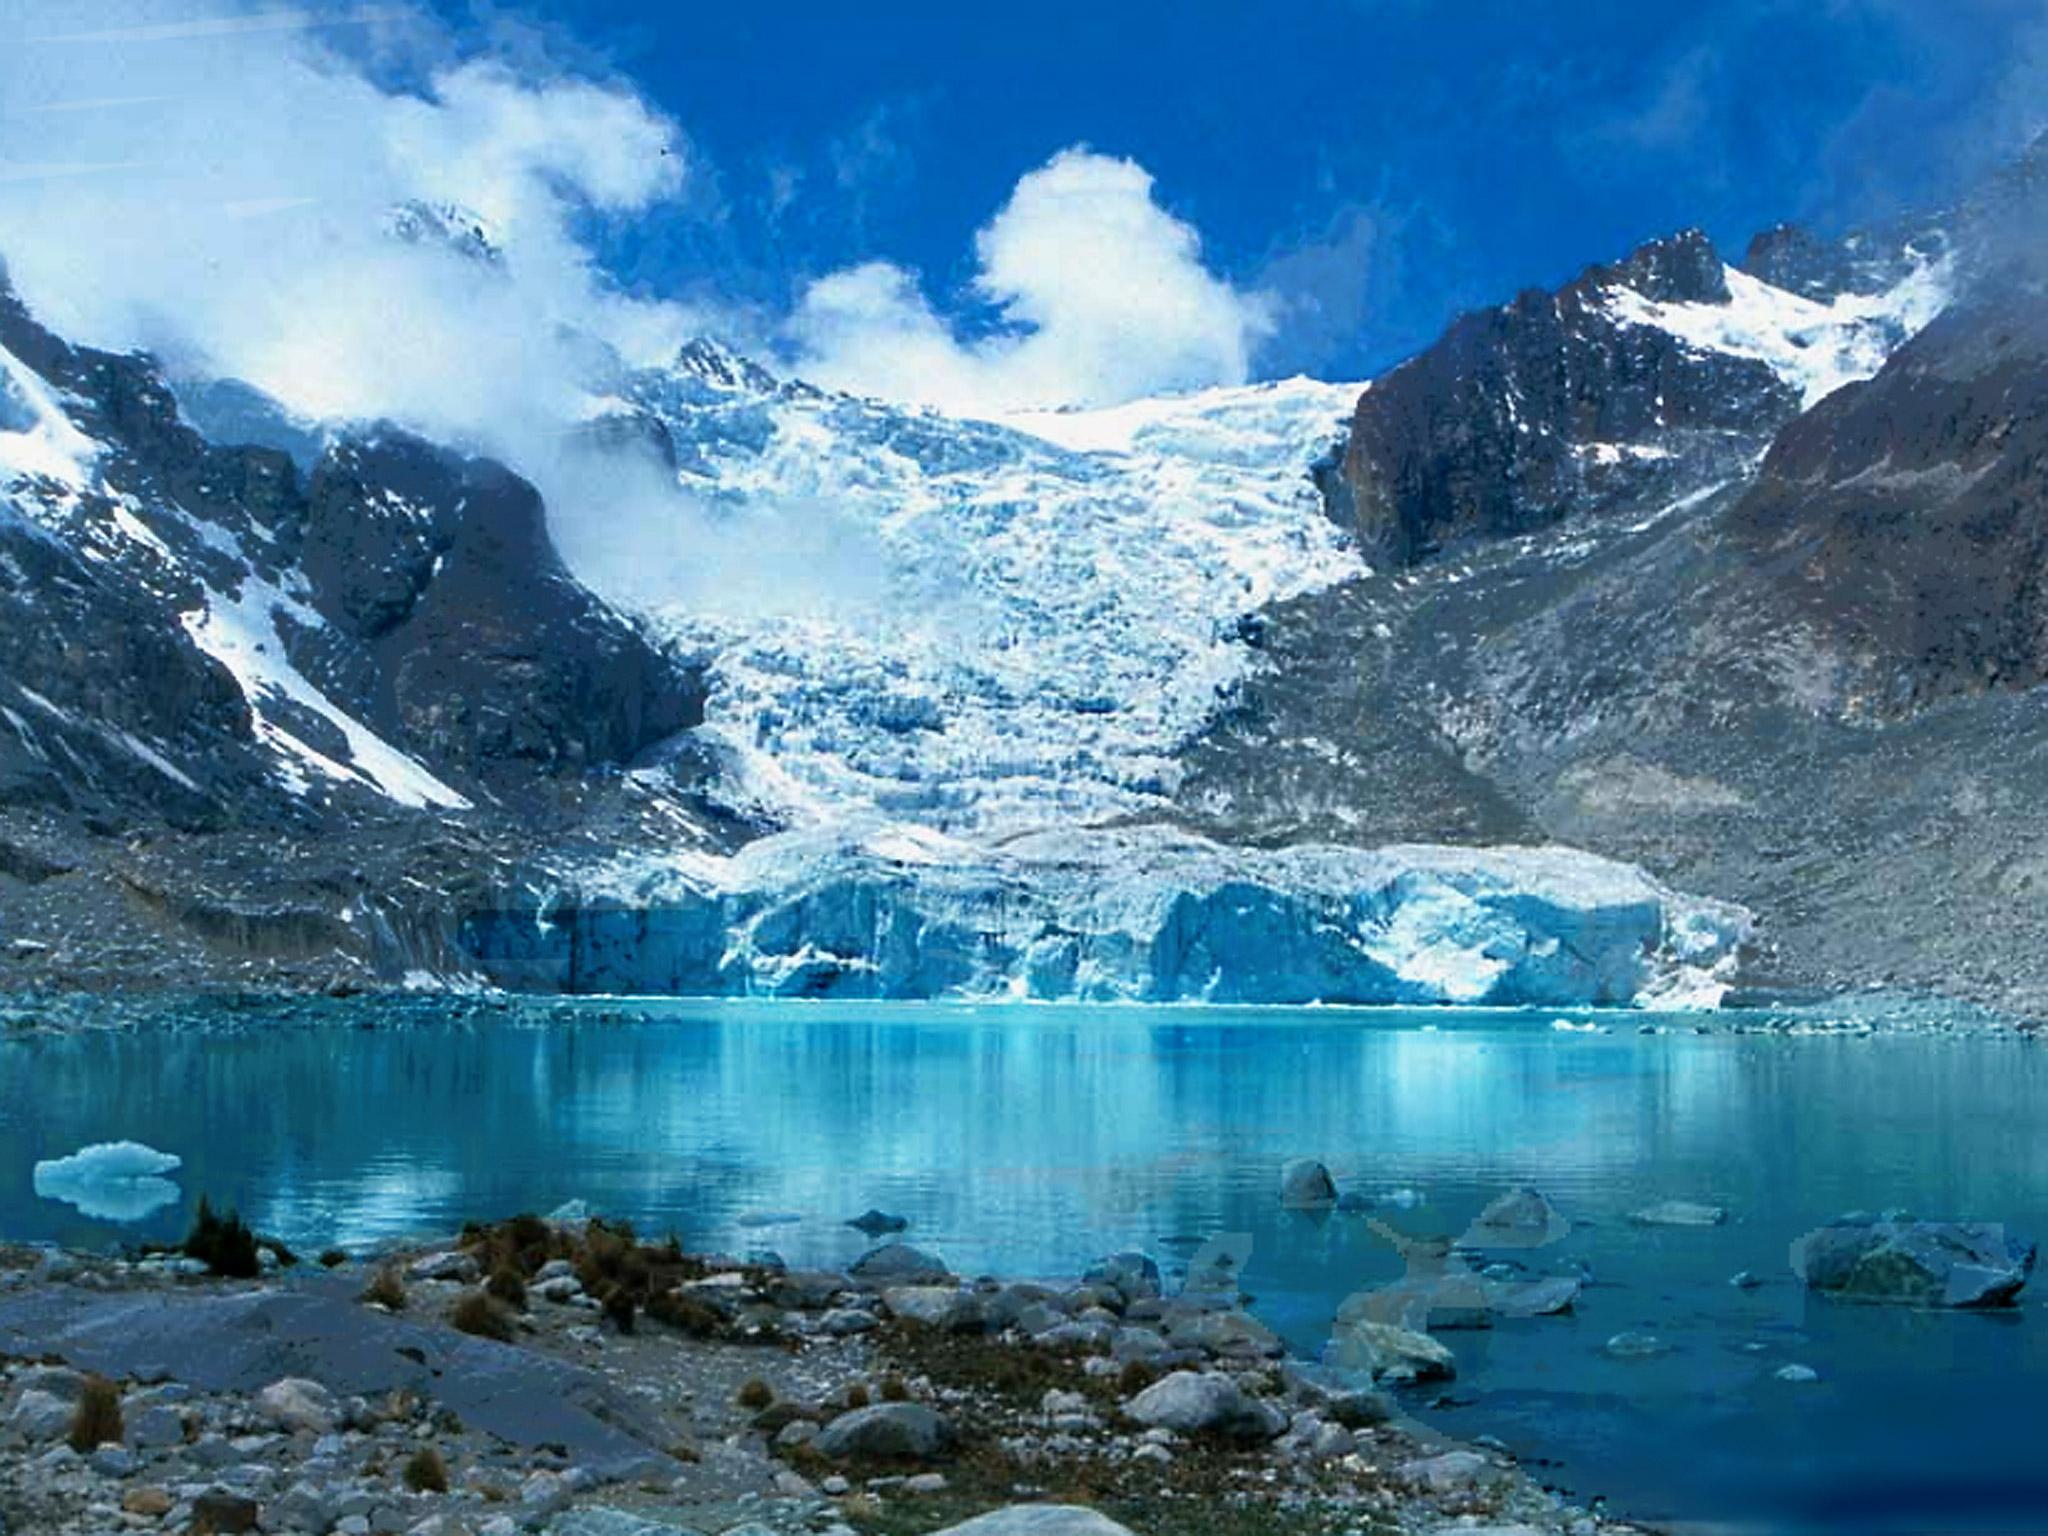 Laguna Glaciar is among 25 potentially dangerous lakes in Bolivia that could threaten downstream areas